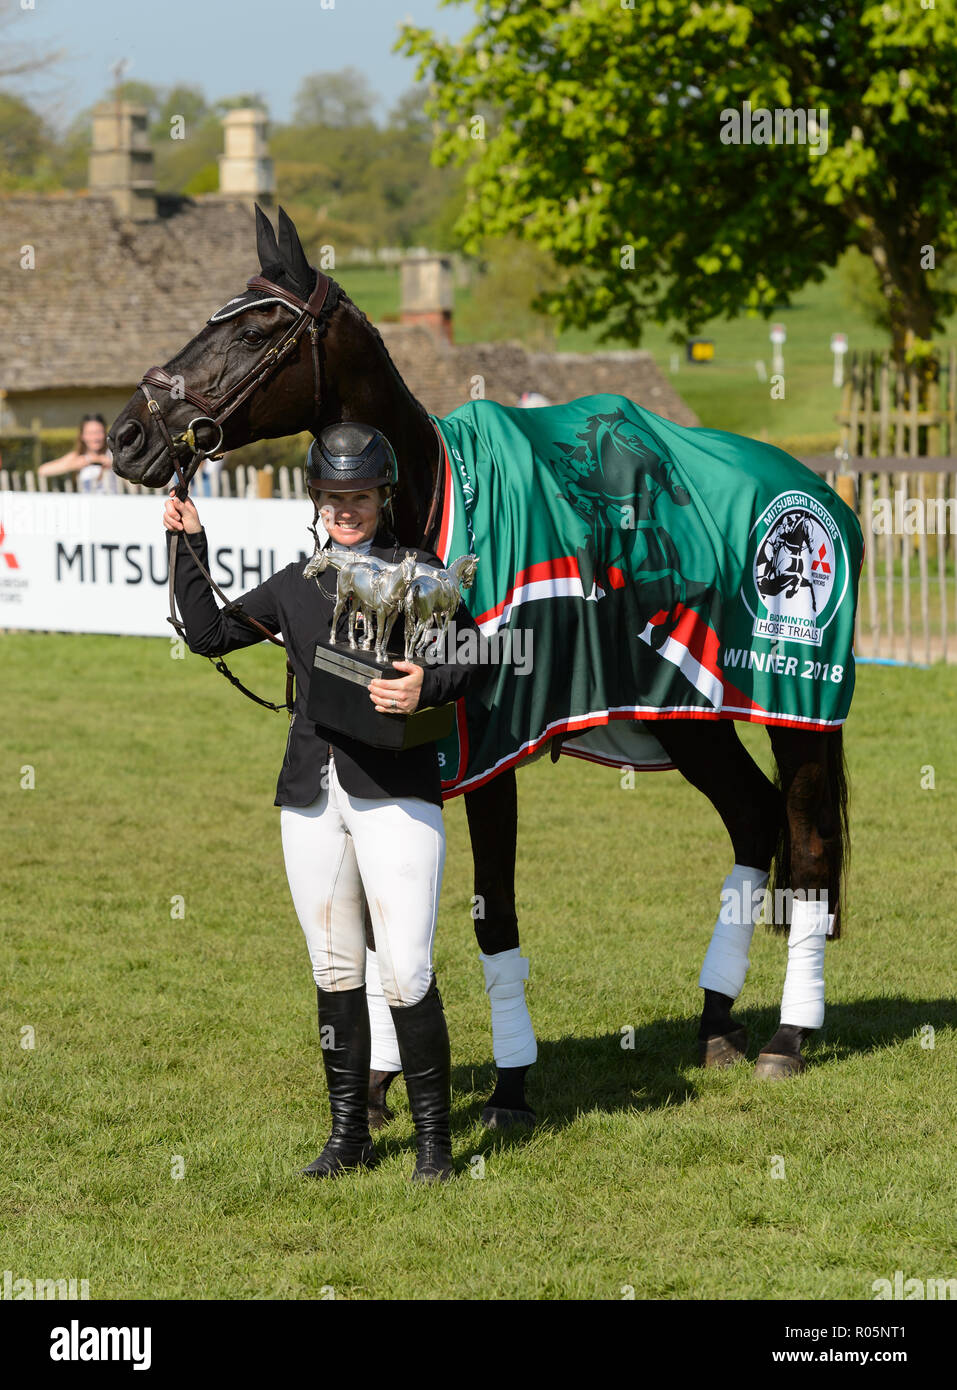 Jonelle Price and CLASSIC MOET with the Mitsubishi Motors Badminton Horse Trials Trophy, Mitsubishi Motors Badminton Horse Trials, Gloucestershire, 2018 Stock Photo